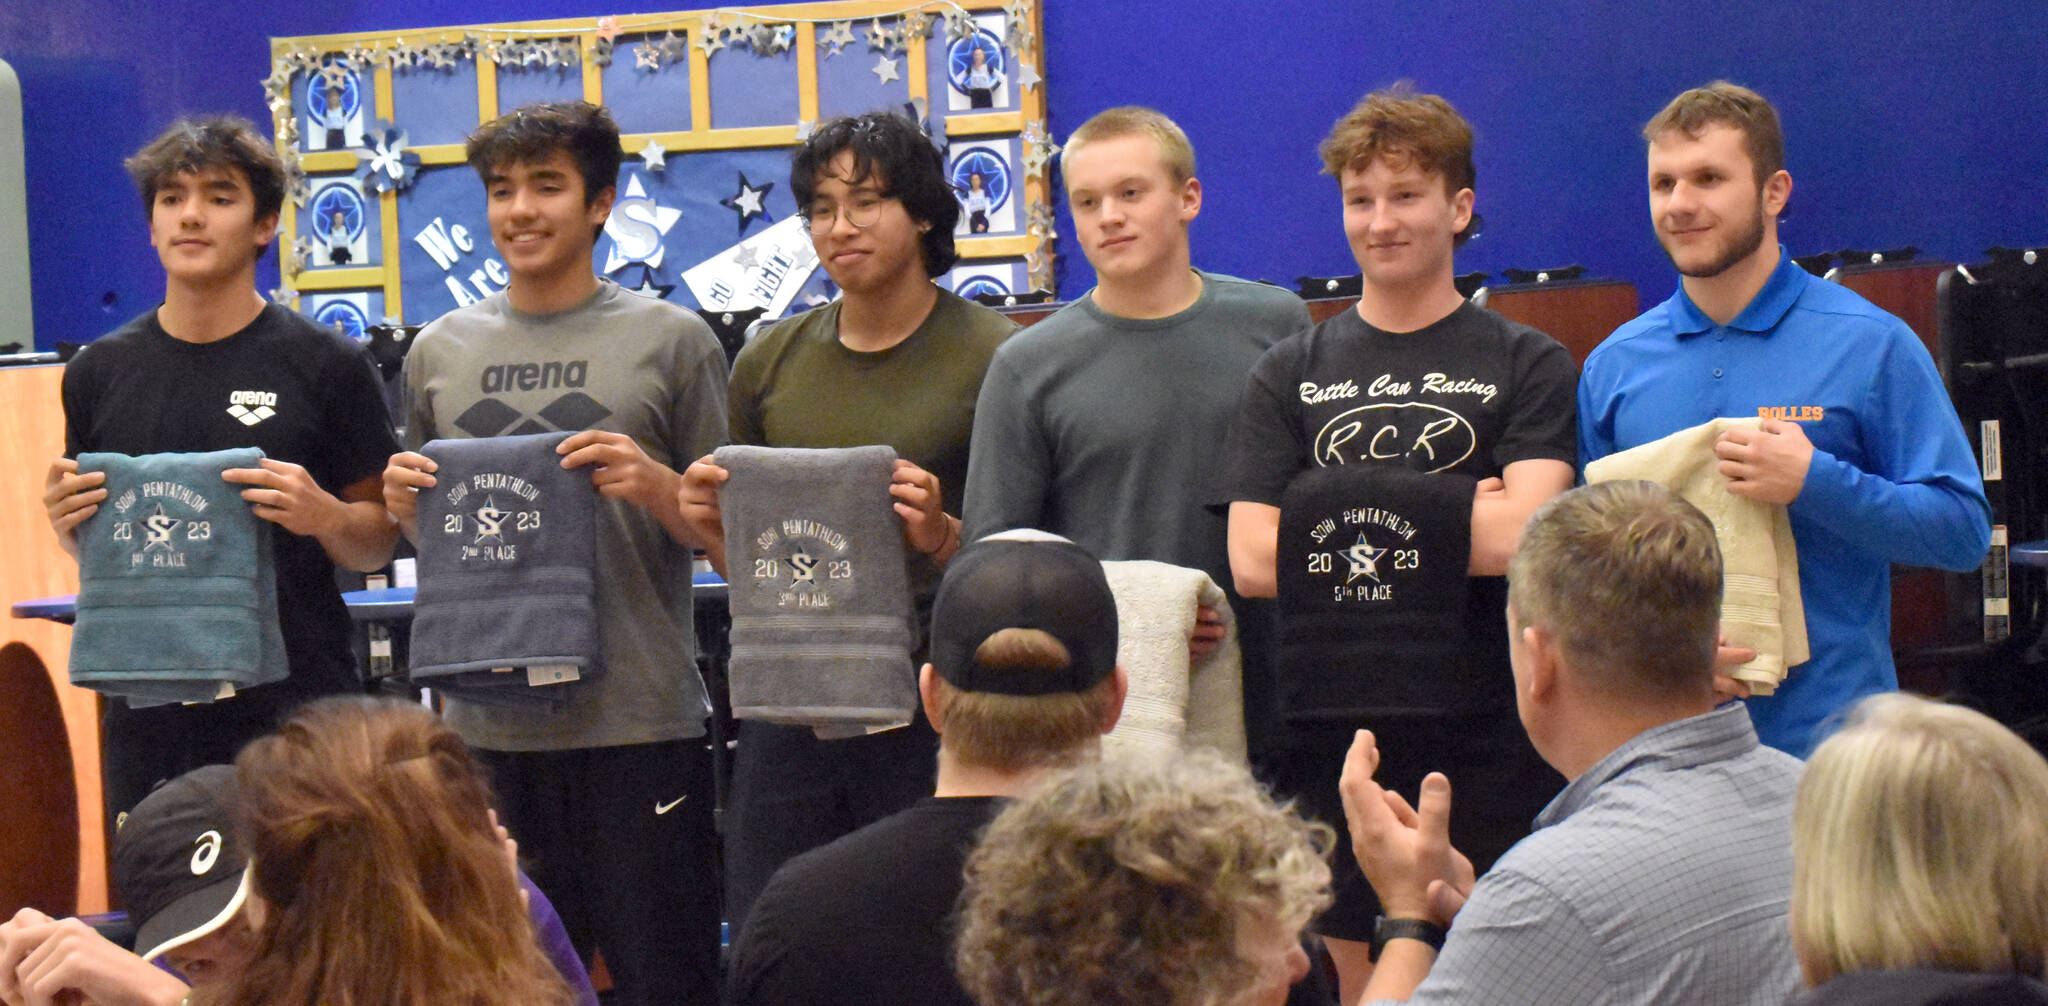 The top six boys finishers in the SoHi Pentathlon pose with their trophy towels on Friday, Sept. 15, 2023, at Soldotna High School in Soldotna, Alaska. From left to right are Seward’s Nickolas Ambrosiani in first, Seward’s Bengimin Ambrosiani in second, Kodiak’s James Berestoff in third, Colony’s Isaiah Hulien in fourth, Palmer’s Aidan Houser in fifth and Soldotna’s Nikita Monyahan in sixth. (Photo by Jeff Helminiak/Peninsula Clarion)